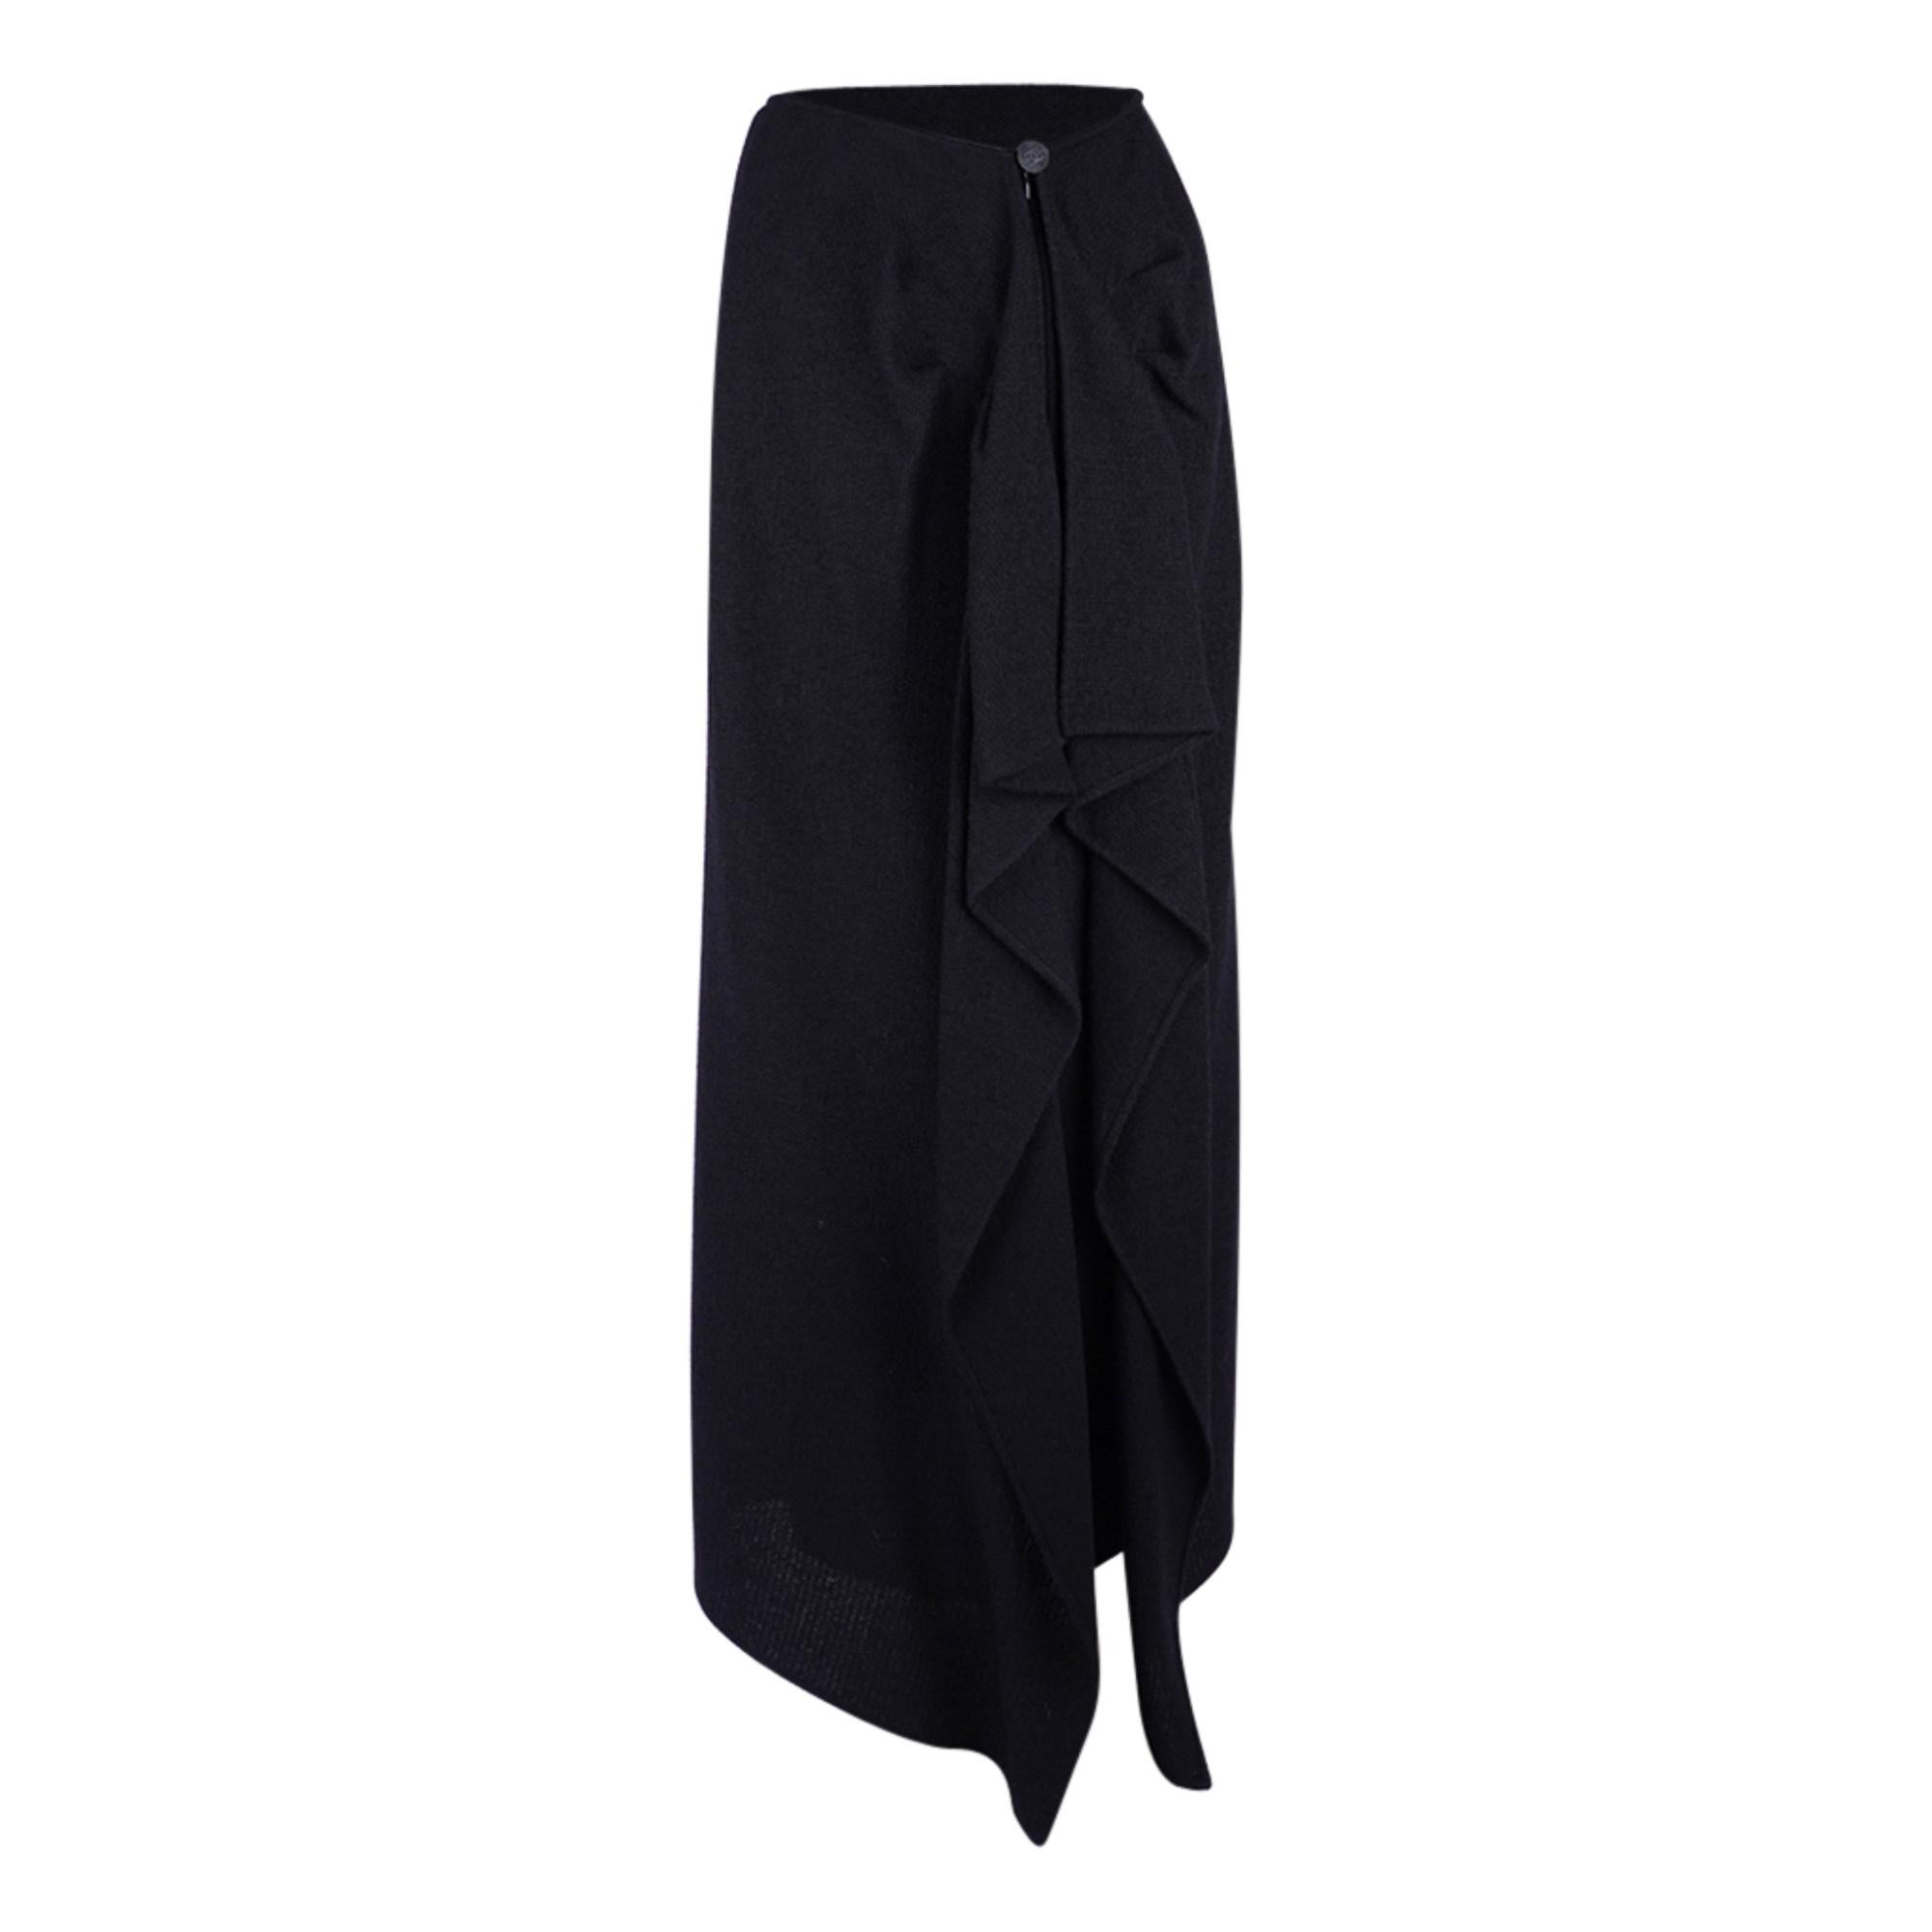 Guaranteed authentic Chanel 98A unique skirt.
Utterly divine.
Jet black long wool skirt that is cut in a very subtle A line and simple in the front.
The waist has a small silver metal plaque embossed Chanel.  Very subtle. 
The story of this amazing